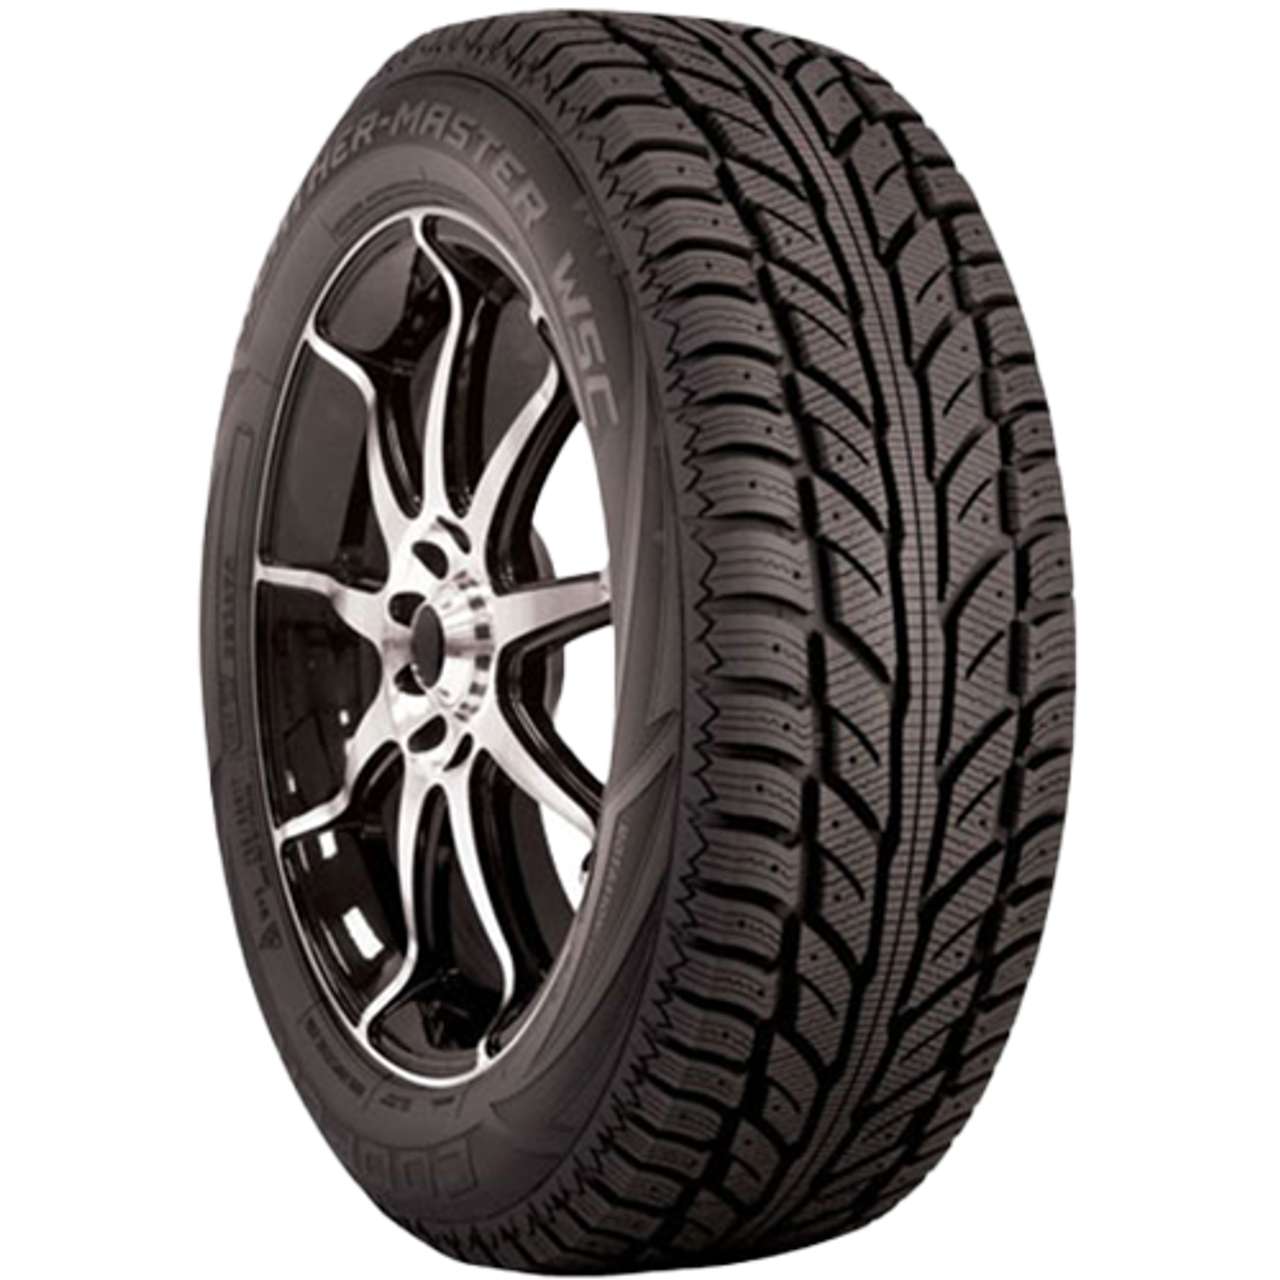 COOPER WEATHERMASTER WSC 195/65R15 95T STUDDABLE BSW